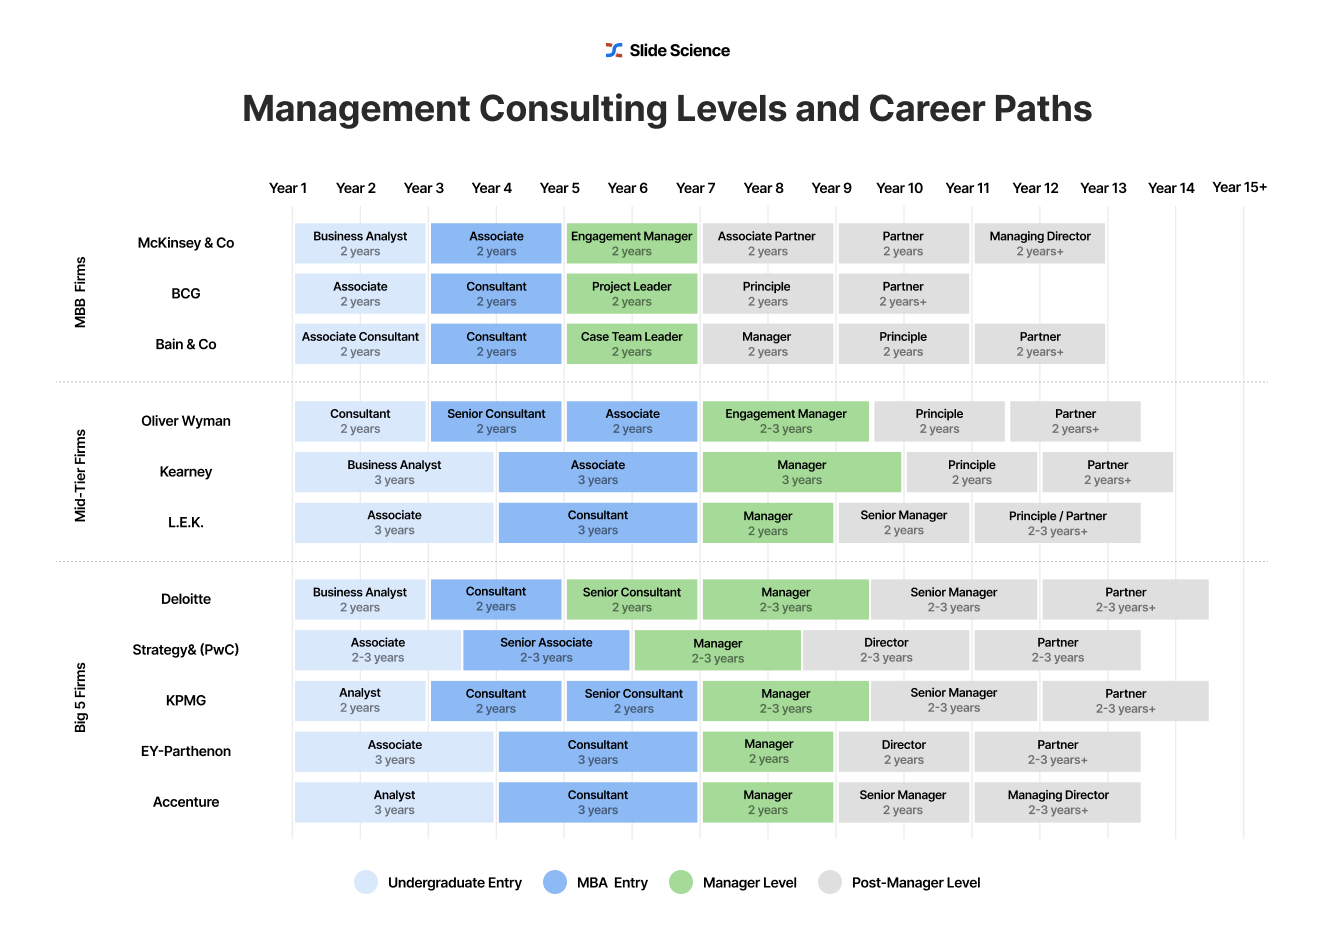 Management Consulting Levels and Career Paths